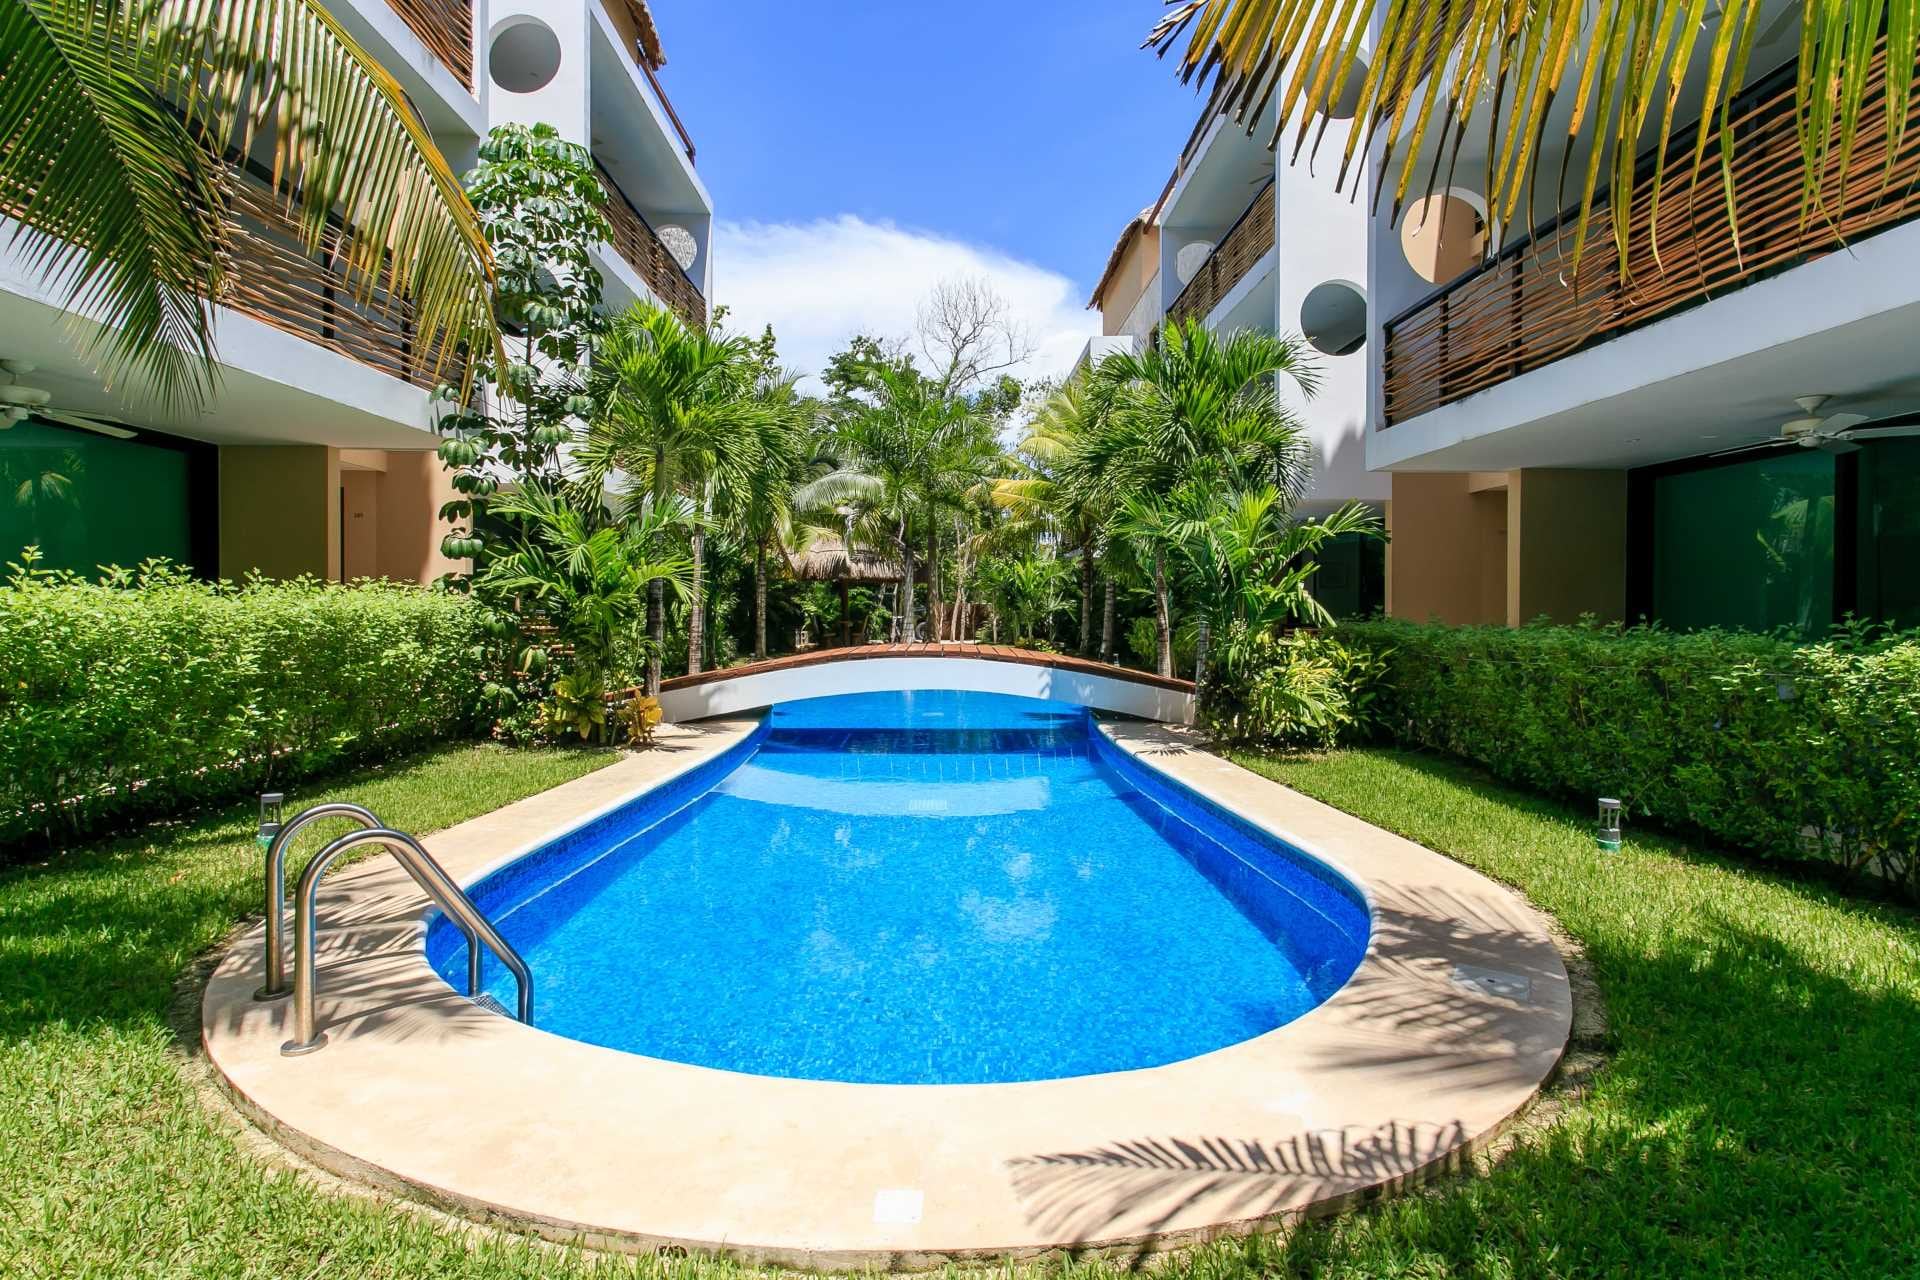 x apartments for sale in tulum encanto garden unit pool and tropical plants